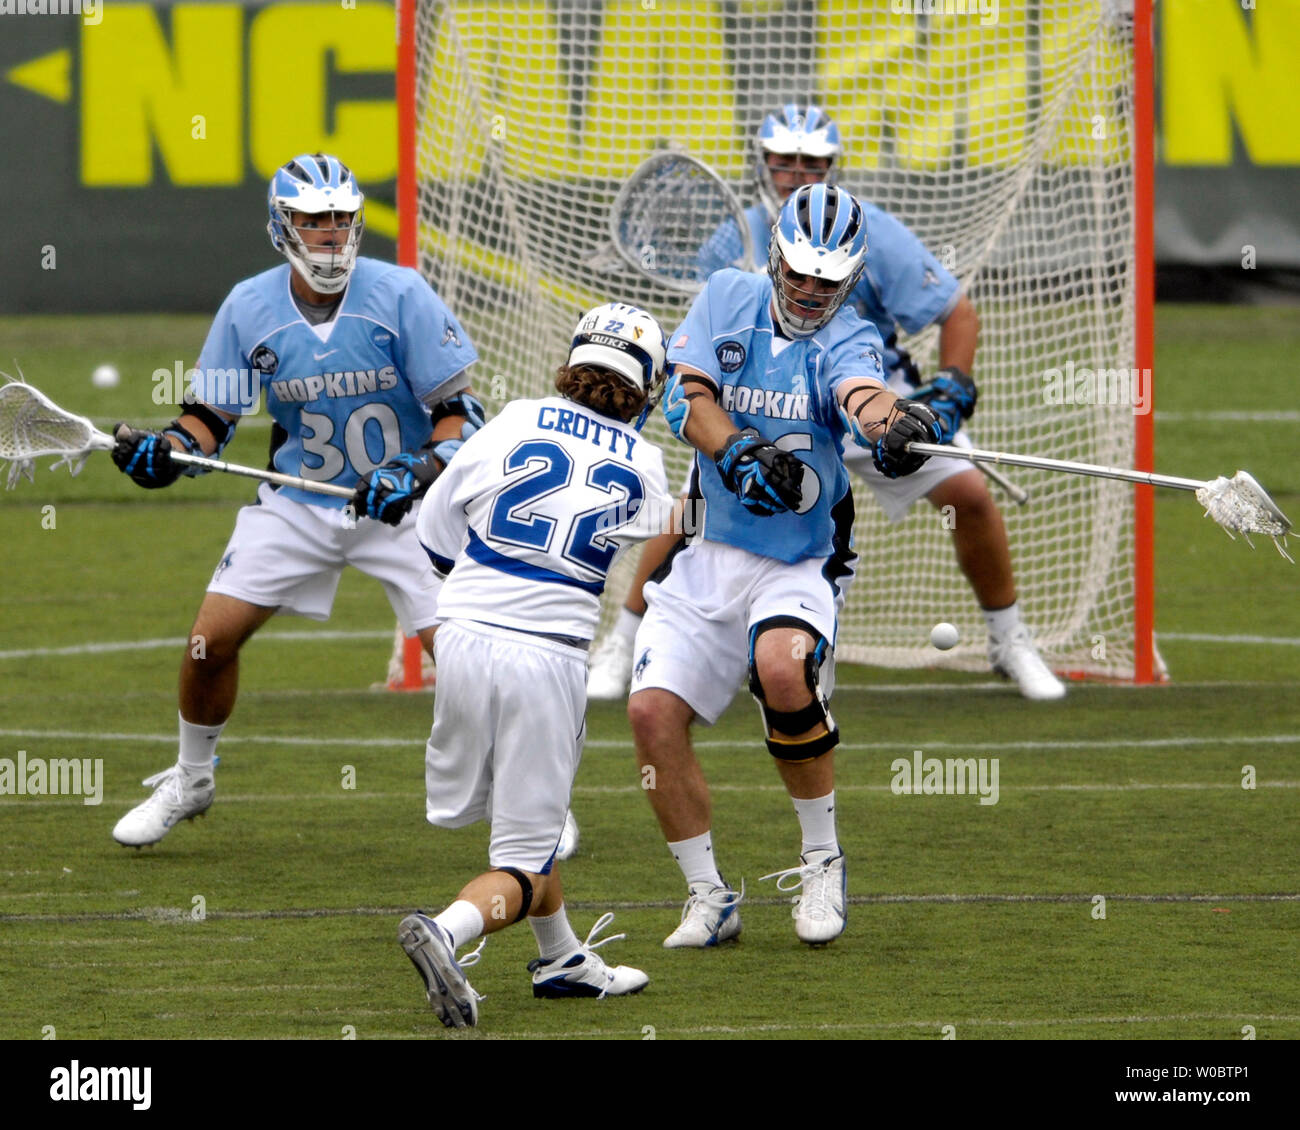 Duke University mid fielder Ned Crotty (22) shoots and scores in the second quarter against Johns Hopkins defenseman Eric Zerrlaut (16) in the NCAA Division I Championship of the lacrosse championship at M&T Bank Stadium in Baltimore, Maryland on on May 28, 2007.  (UPI Photo/ Mark Goldman) Stock Photo